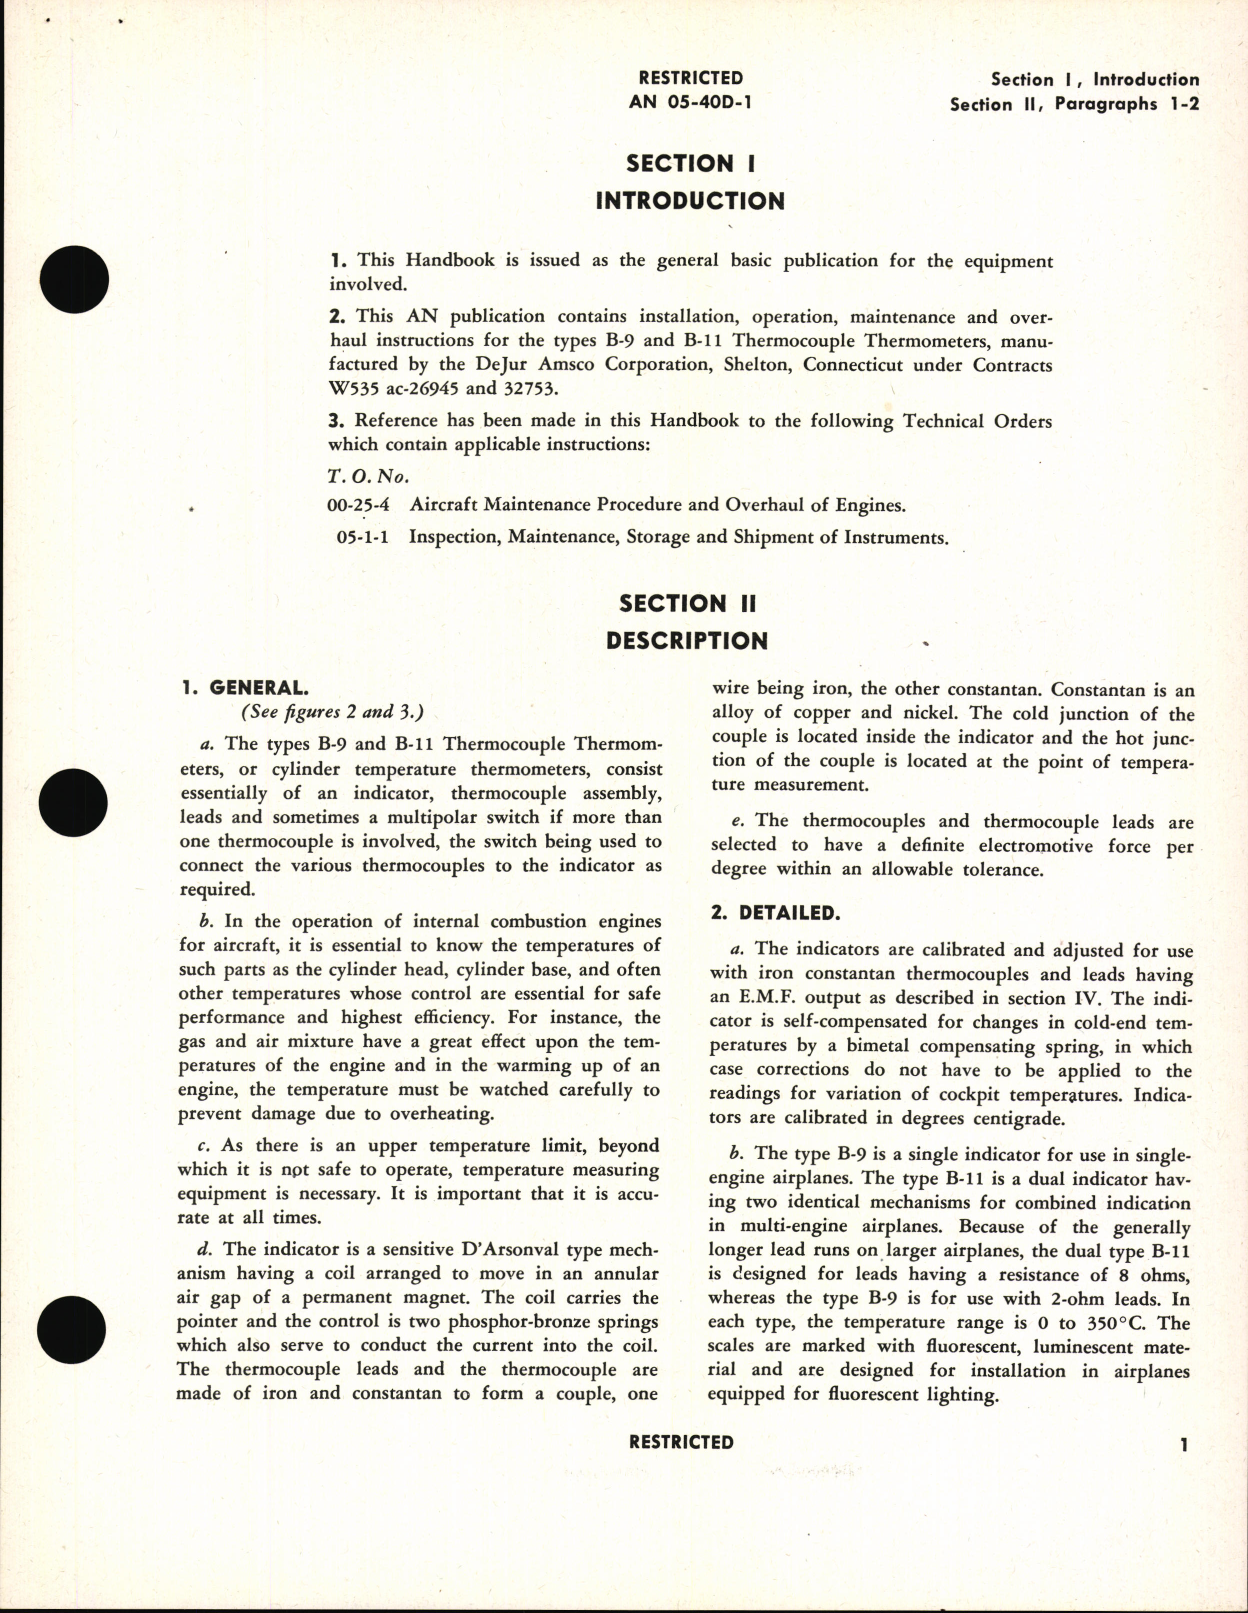 Sample page 7 from AirCorps Library document: Handbook of Instructions with Parts Catalog for Types B-9 and B-11 Thermocouple Thermometers